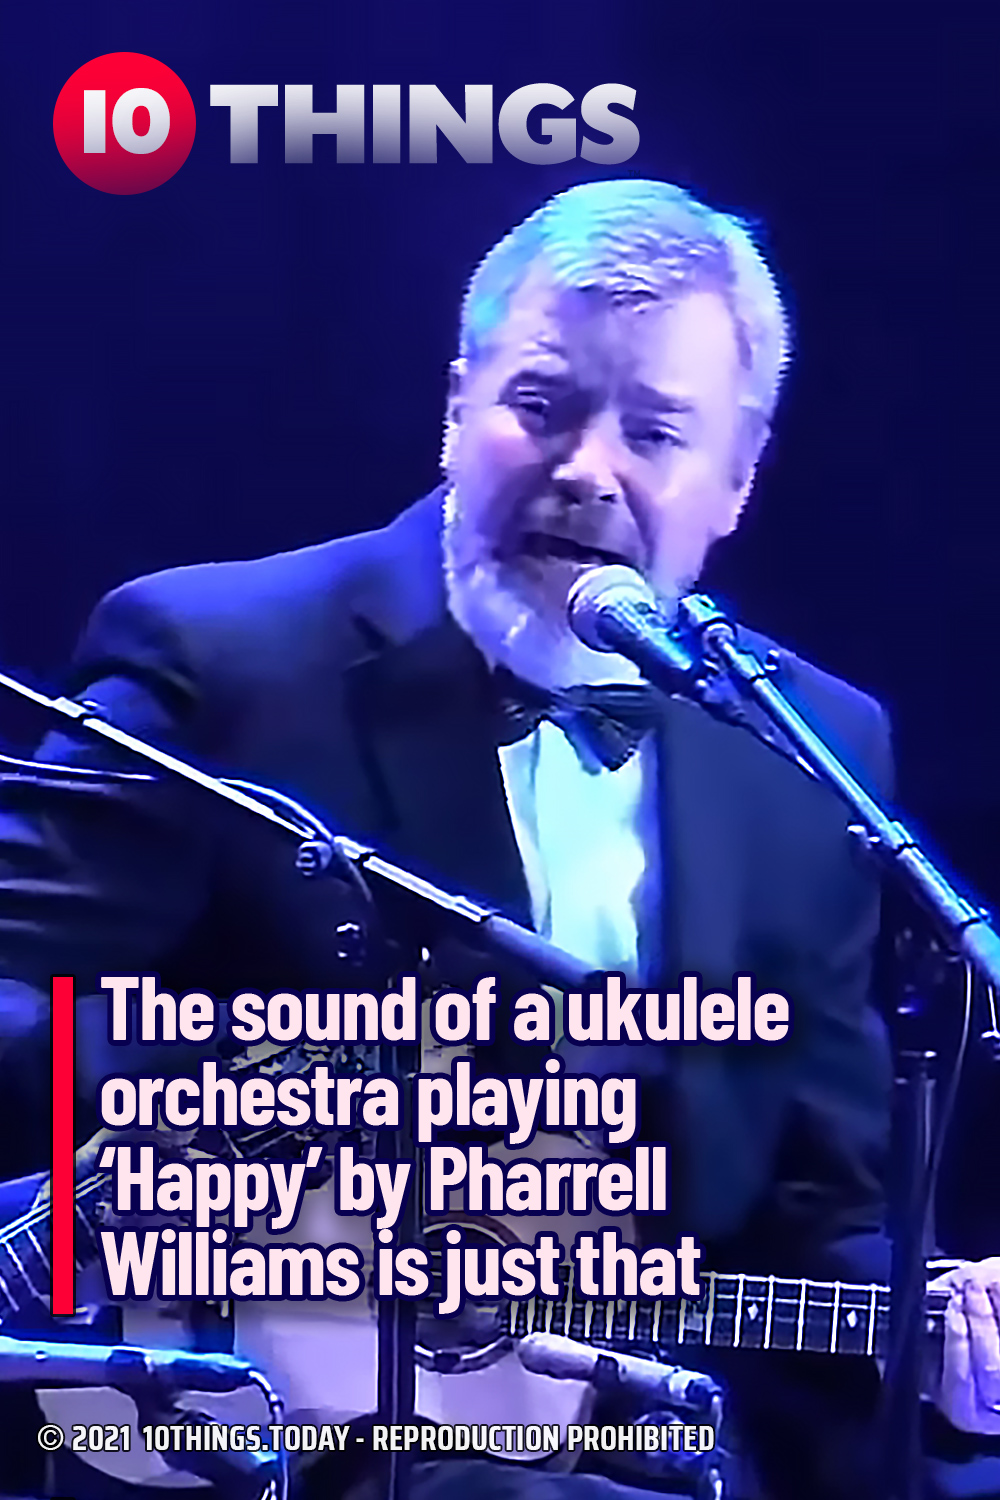 The sound of a ukulele orchestra playing ‘Happy’ by Pharrell Williams is just that